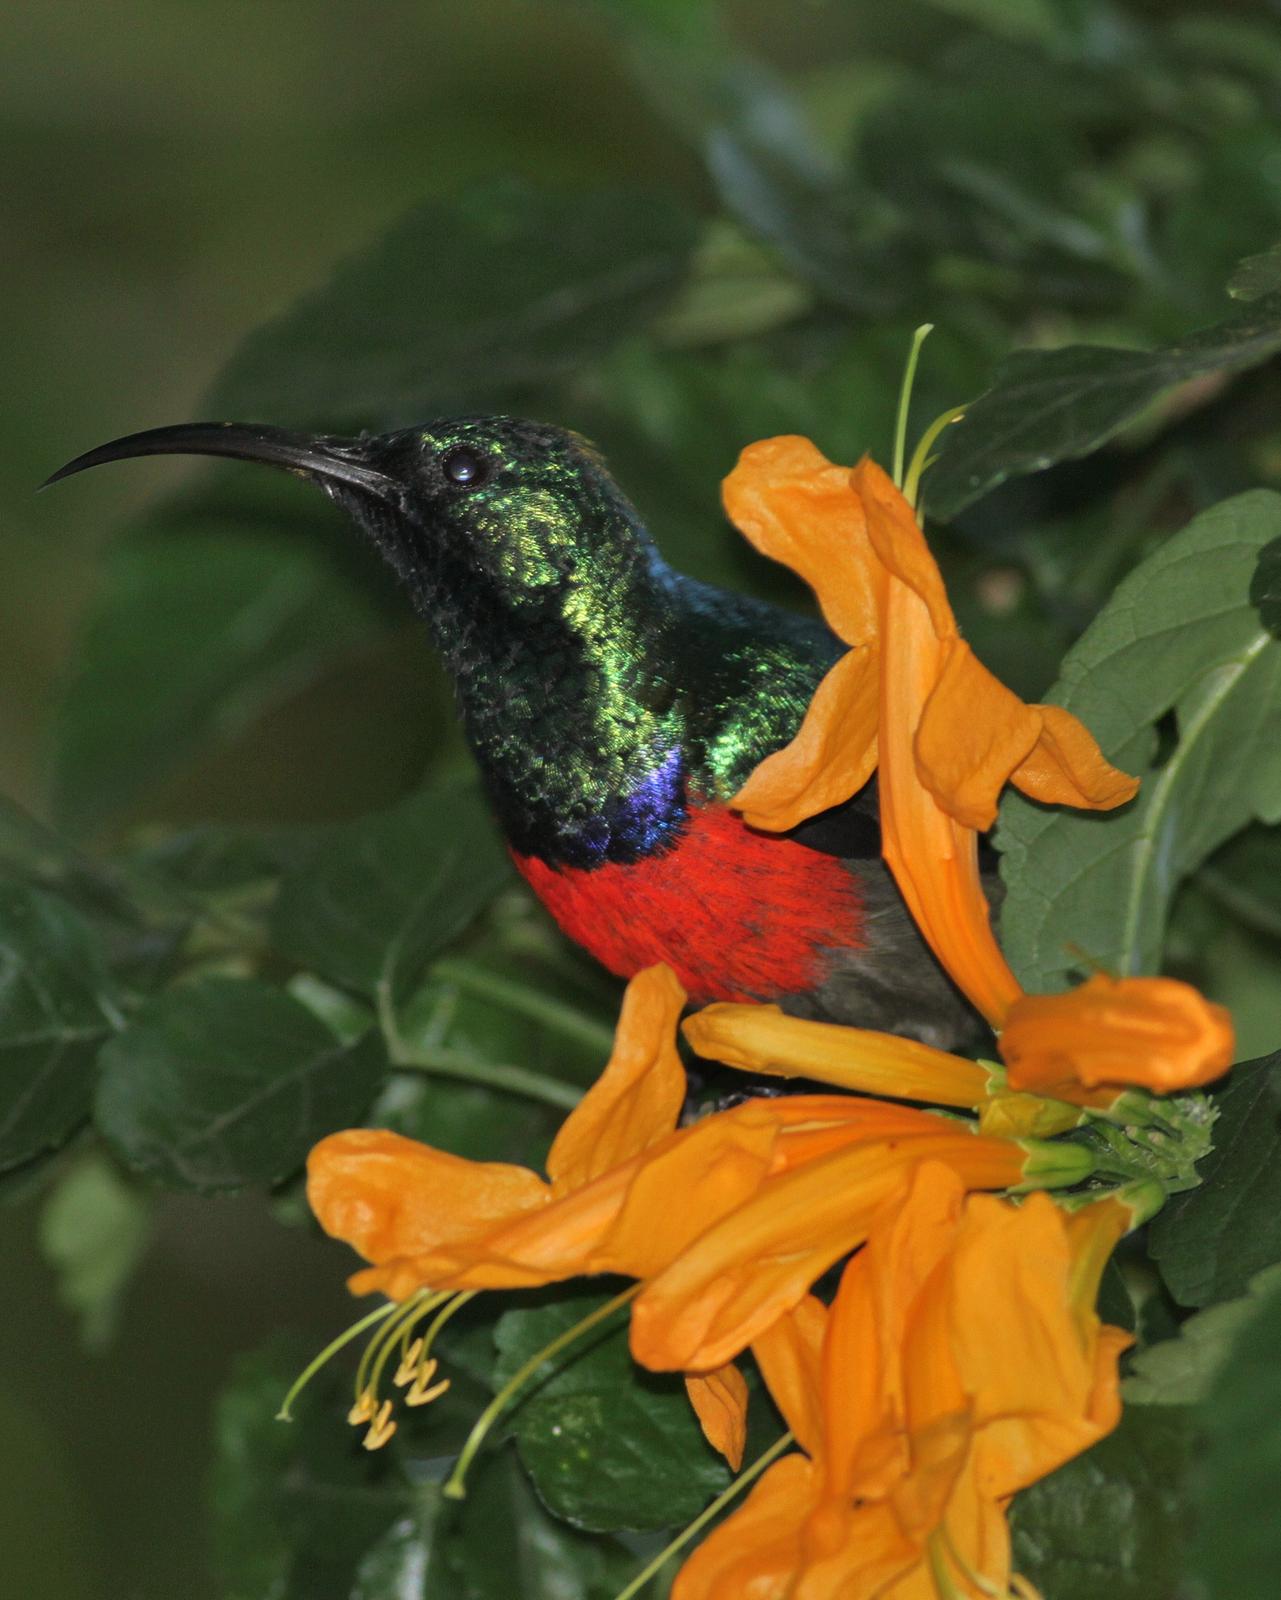 Greater Double-collared Sunbird Photo by Alex Lamoreaux